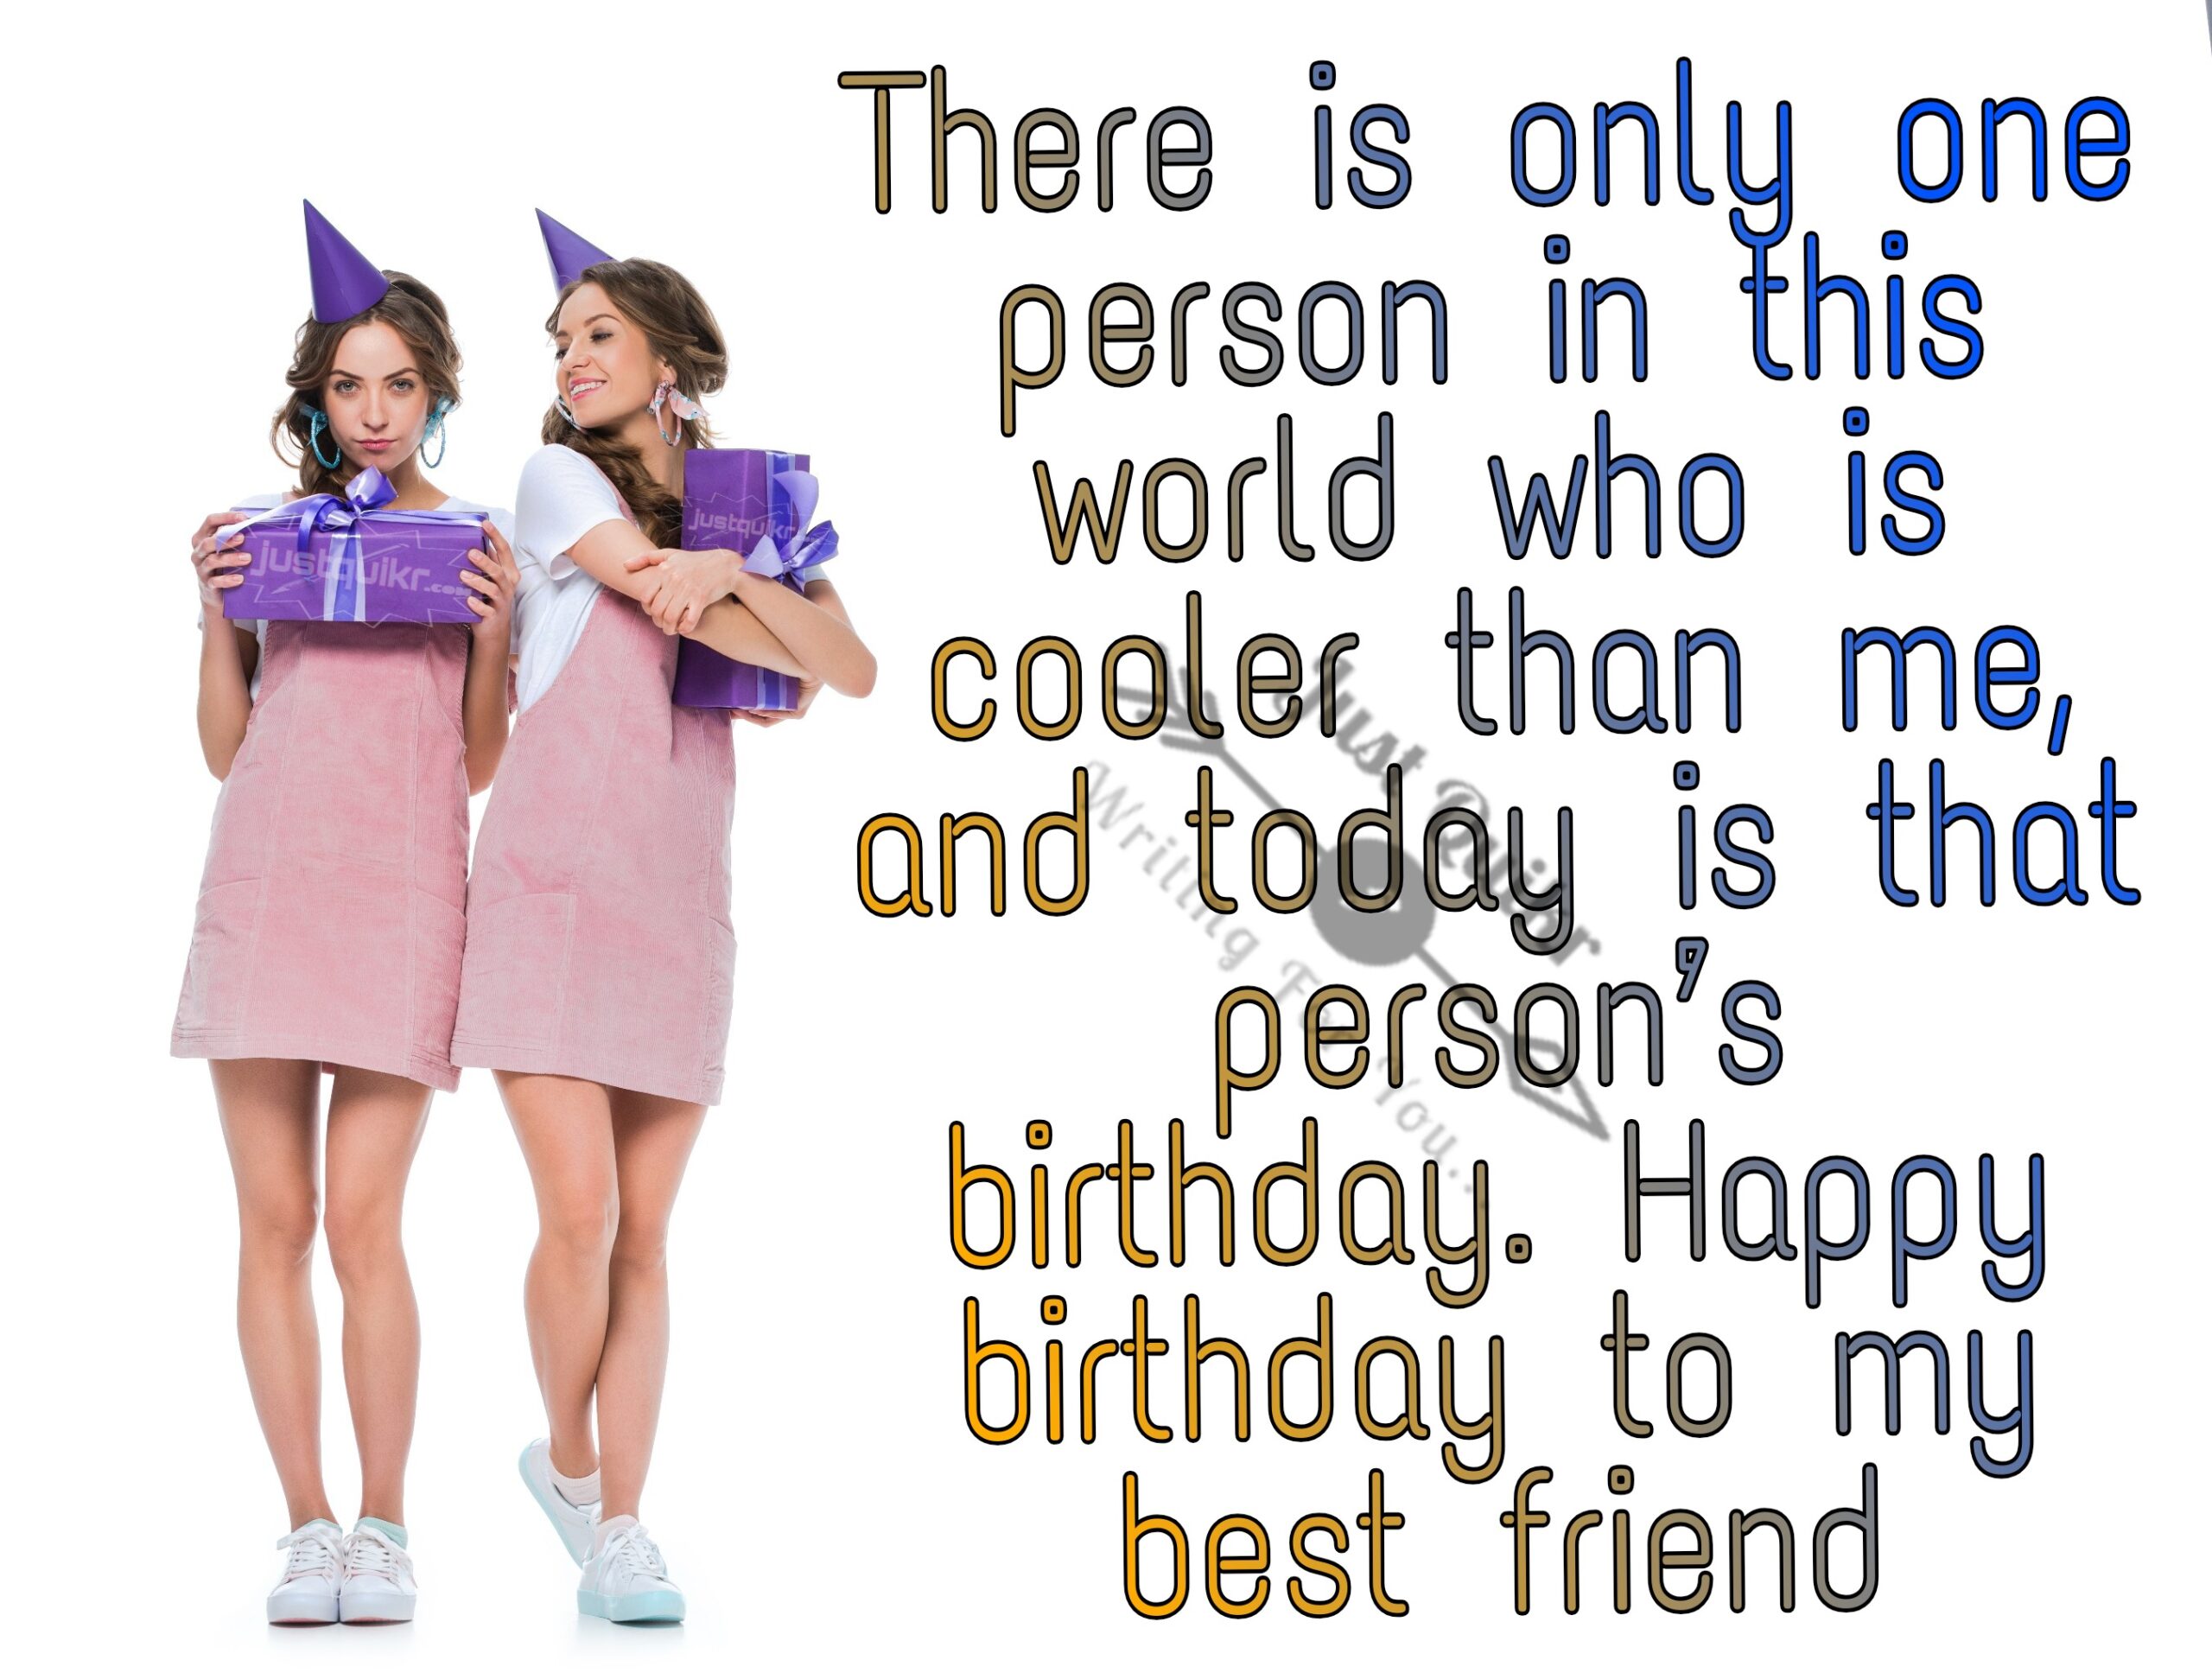 Creative Happy Birthday Wishes Thoughts Quotes Lines Messages in English for Good Friend